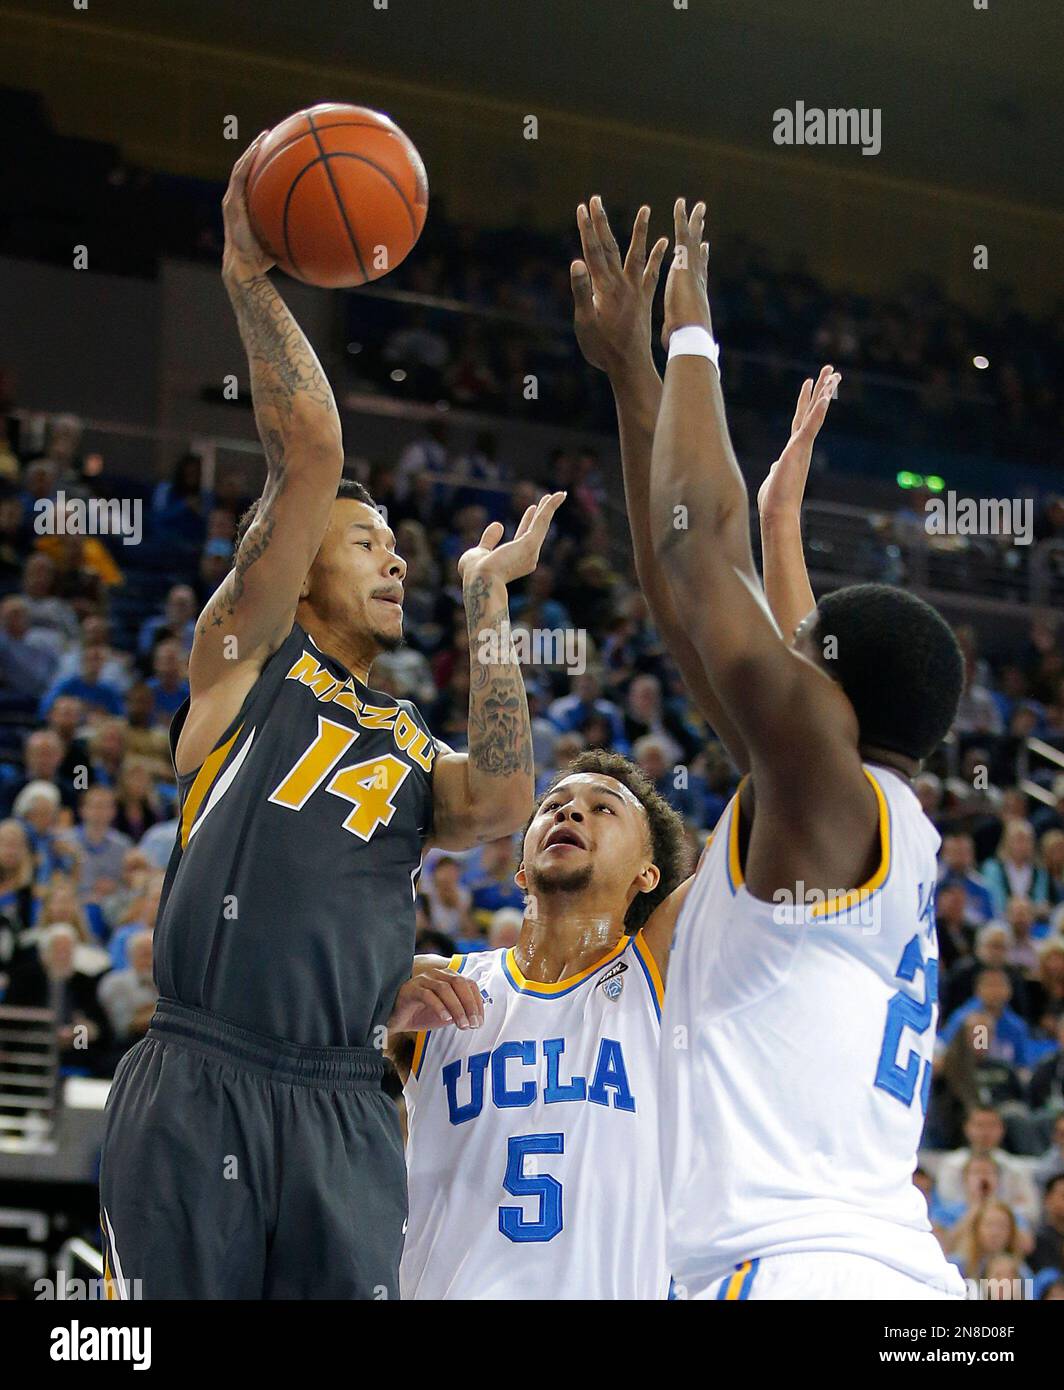 Missouri's Negus Webster-Chan, left, passes the ball as he is defended by UCLA's Tony Parker, right, and Kyle Anderson during the first half of an NCAA college basketball game in Los Angeles, Friday, Dec. 28, 2012. (AP Photo/Jae C. Hong) Stock Photo